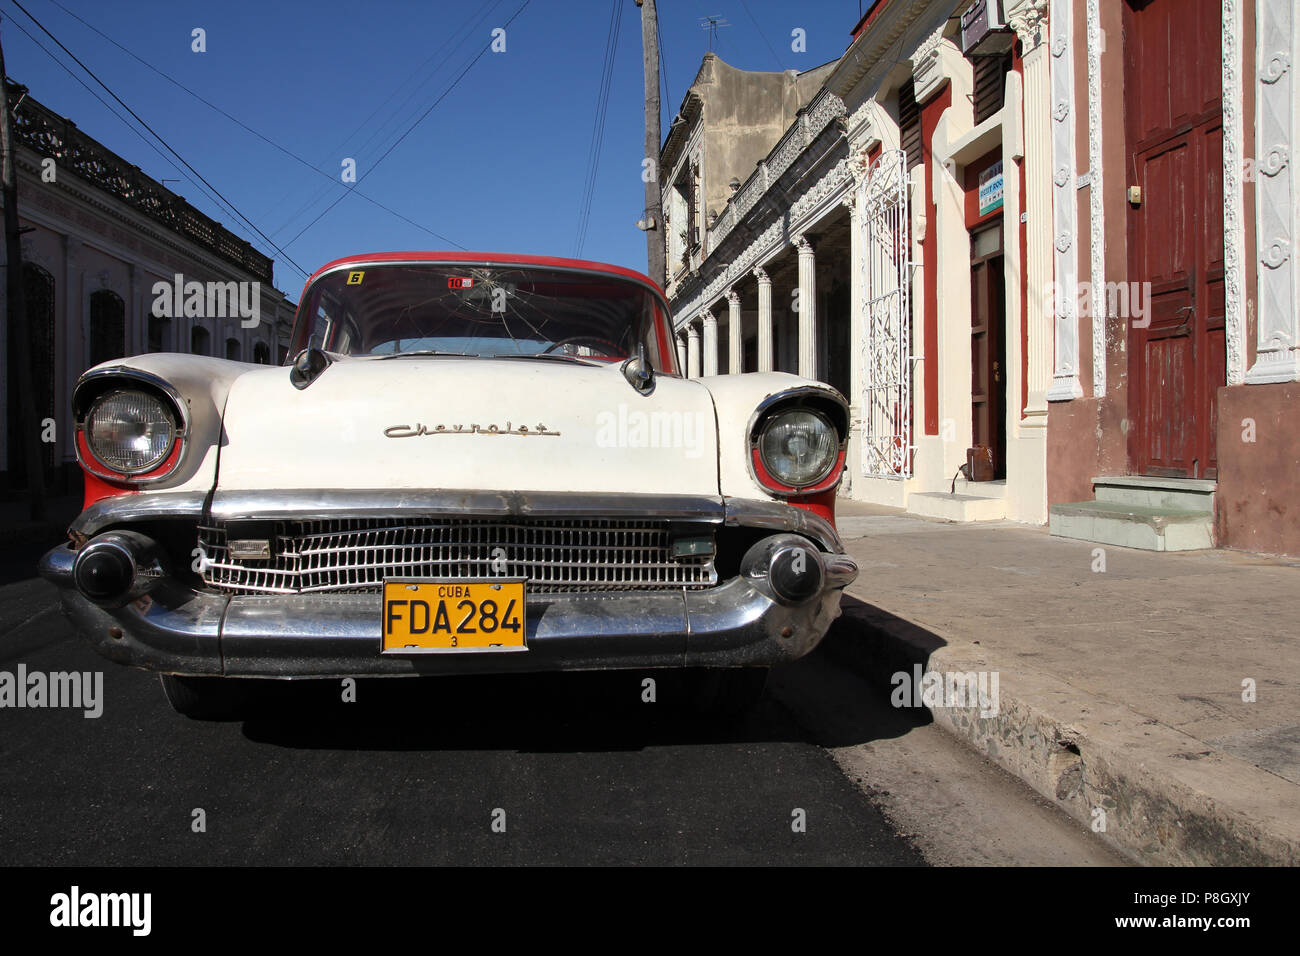 CIENFUEGOS, CUBA - FEBRUARY 3: Classic American Chevrolet car parked in the street on February 3, 2011 in Cienfuegos, Cuba. The multitude of oldtimer  Stock Photo